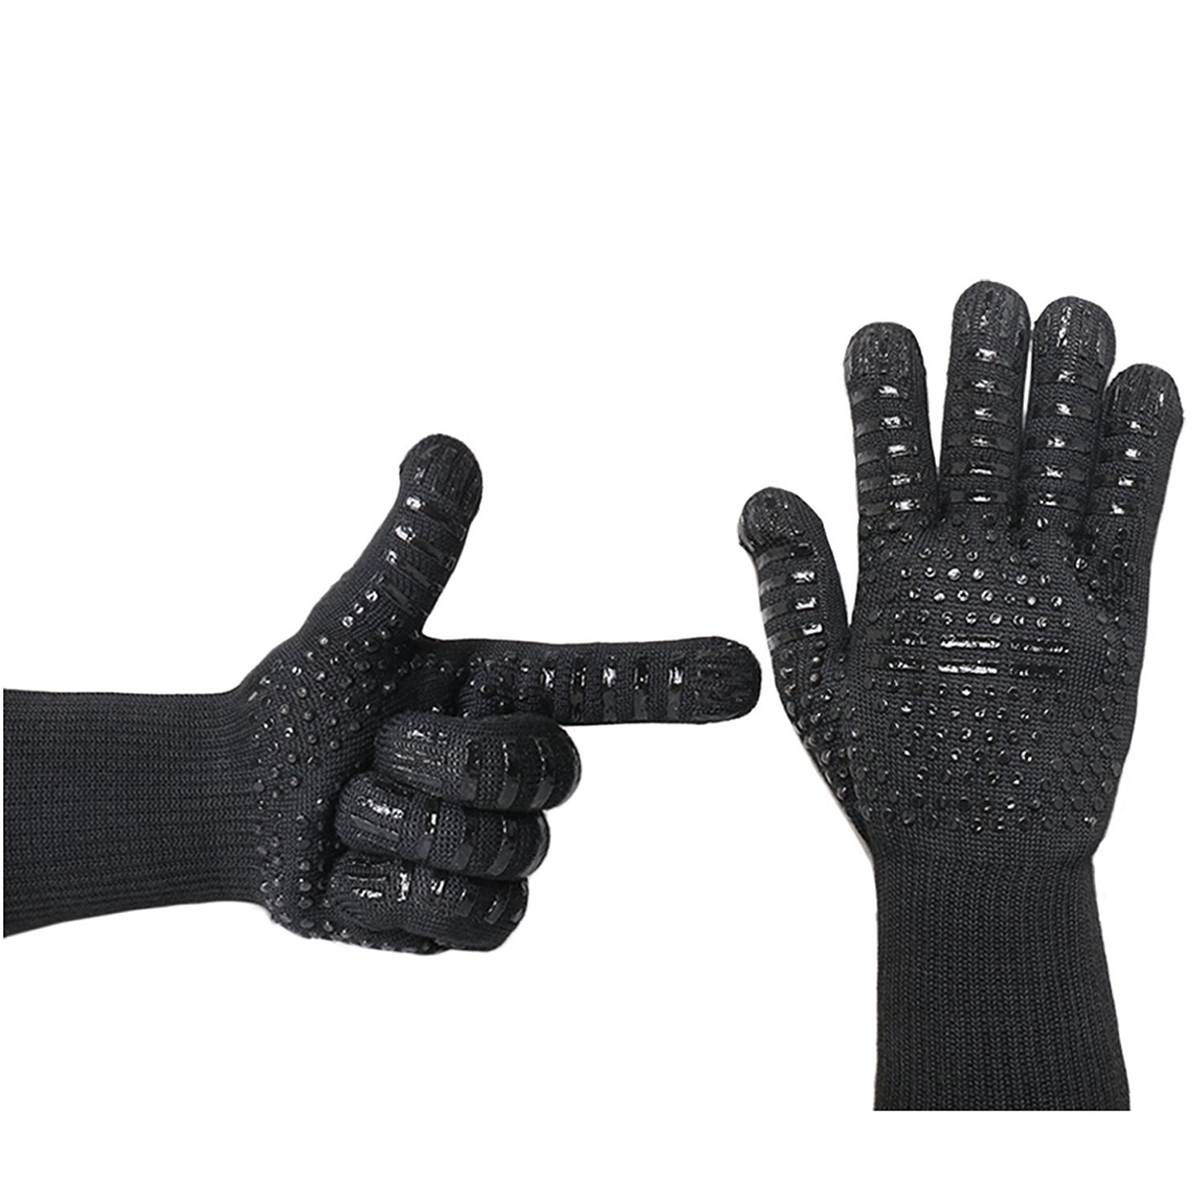 Silicone-Extreme-500-Heat-Resistant-Glove-Cooking-Oven-Hot-Mitt-BBQ-Grilling-Glove-1375771